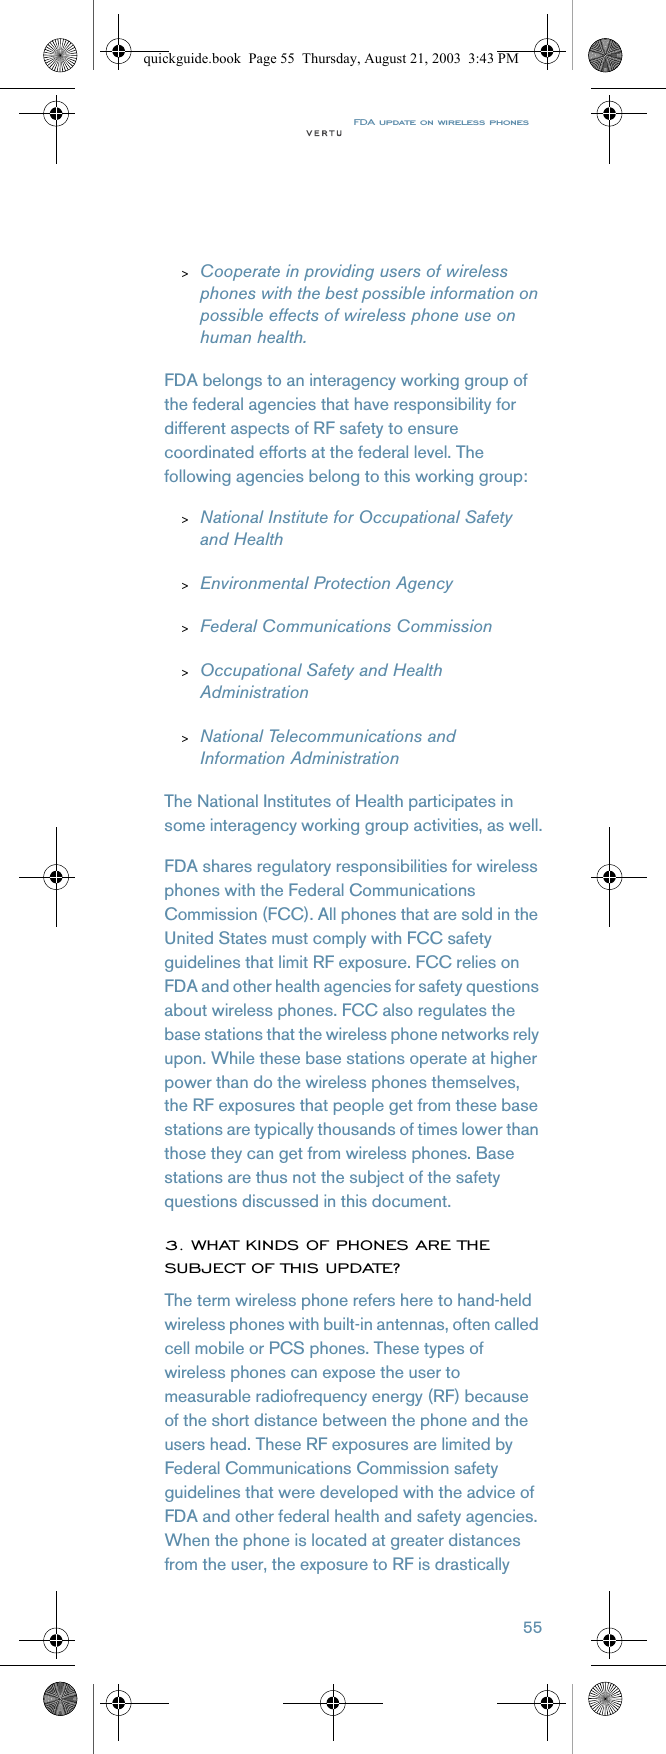 FDA update on wireless phones55&gt;Cooperate in providing users of wireless phones with the best possible information on possible effects of wireless phone use on human health.FDA belongs to an interagency working group of the federal agencies that have responsibility for different aspects of RF safety to ensure coordinated efforts at the federal level. The following agencies belong to this working group:&gt;National Institute for Occupational Safety and Health&gt;Environmental Protection Agency&gt;Federal Communications Commission&gt;Occupational Safety and Health Administration&gt;National Telecommunications and Information AdministrationThe National Institutes of Health participates in some interagency working group activities, as well.FDA shares regulatory responsibilities for wireless phones with the Federal Communications Commission (FCC). All phones that are sold in the United States must comply with FCC safety guidelines that limit RF exposure. FCC relies on FDA and other health agencies for safety questions about wireless phones. FCC also regulates the base stations that the wireless phone networks rely upon. While these base stations operate at higher power than do the wireless phones themselves, the RF exposures that people get from these base stations are typically thousands of times lower than those they can get from wireless phones. Base stations are thus not the subject of the safety questions discussed in this document.3. WHAT KINDS OF PHONES ARE THE SUBJECT OF THIS UPDATE?The term wireless phone refers here to hand-held wireless phones with built-in antennas, often called cell mobile or PCS phones. These types of wireless phones can expose the user to measurable radiofrequency energy (RF) because of the short distance between the phone and the users head. These RF exposures are limited by Federal Communications Commission safety guidelines that were developed with the advice of FDA and other federal health and safety agencies. When the phone is located at greater distances from the user, the exposure to RF is drastically quickguide.book  Page 55  Thursday, August 21, 2003  3:43 PM